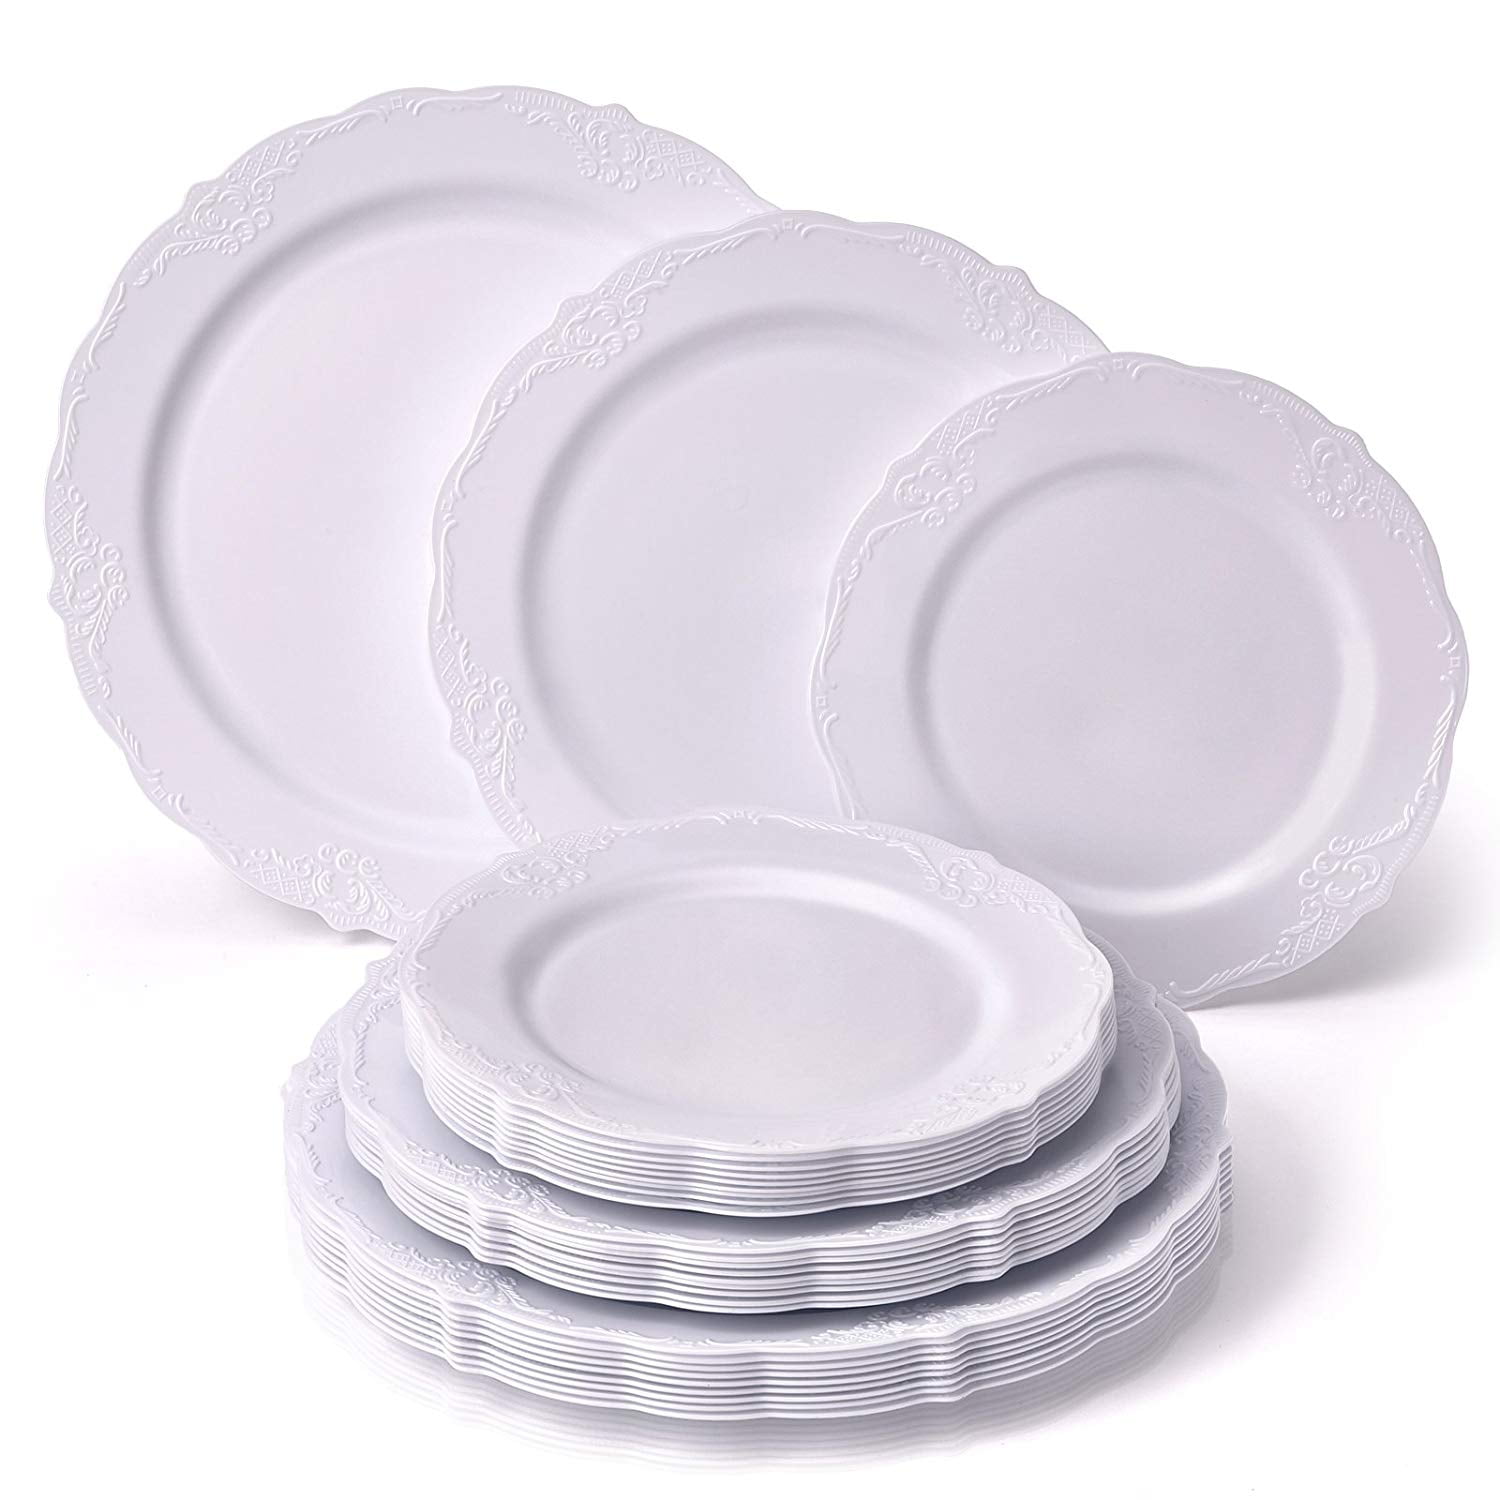 Party Disposable 20 pc Dinnerware Set Heavyweight Plastic Dishes 20 Dessert Plates for Upscale Wedding and Dining Elegant Fine China Look Vintage Collection – Cream | 7.5 Inch